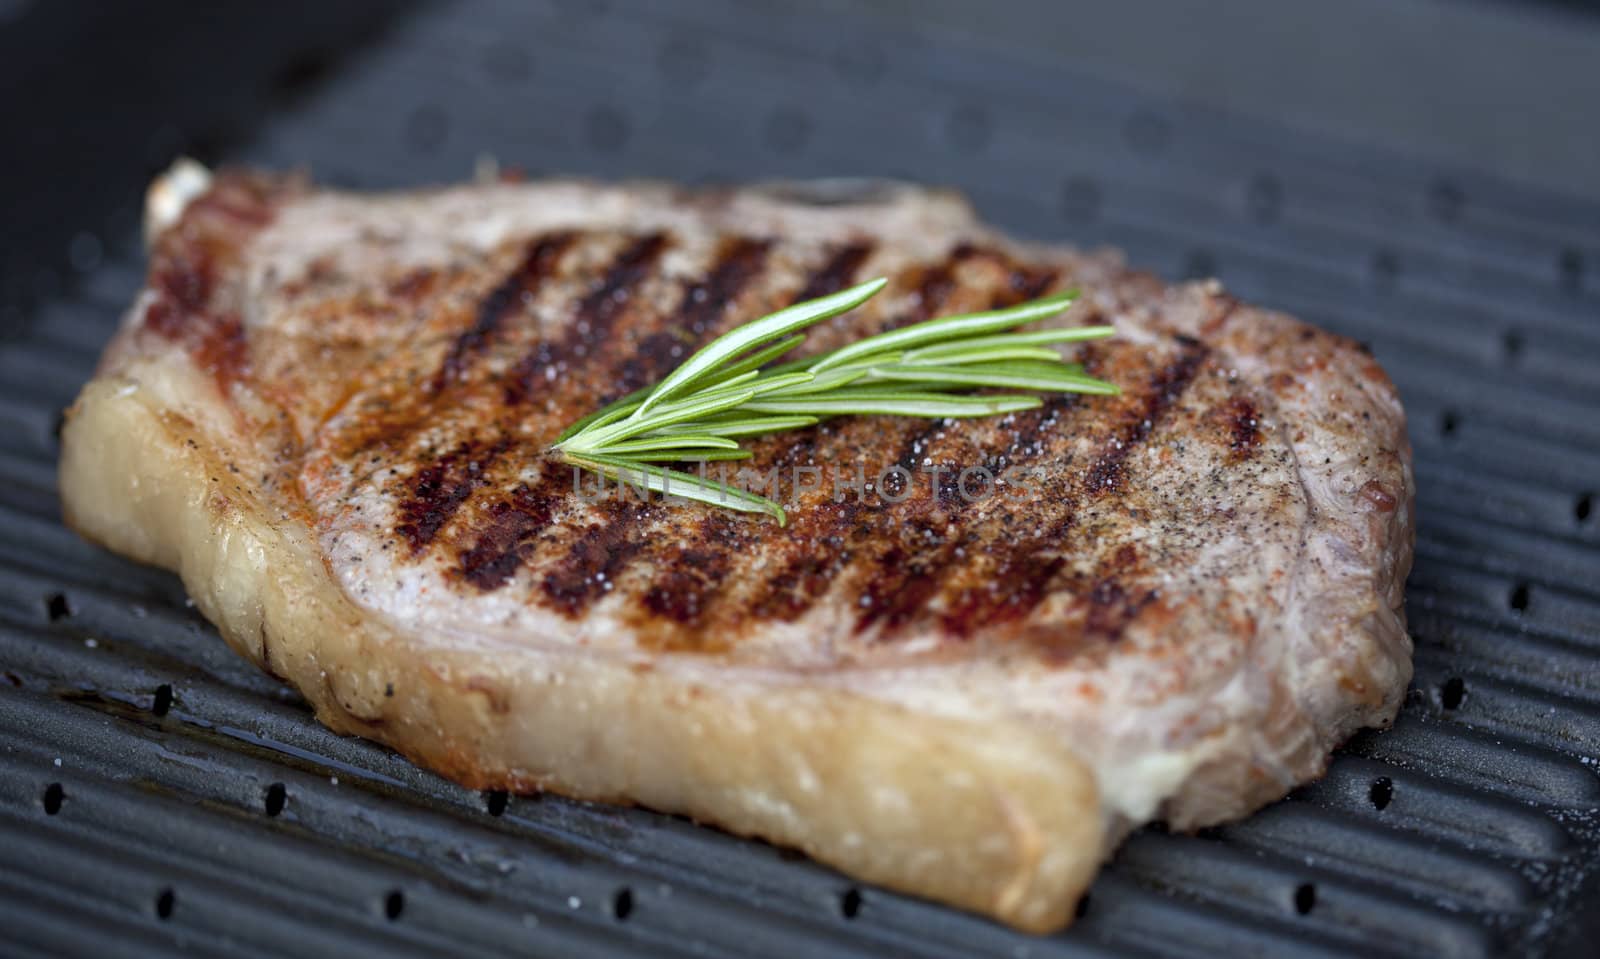 Beef steak on the grill with marks and rosemary